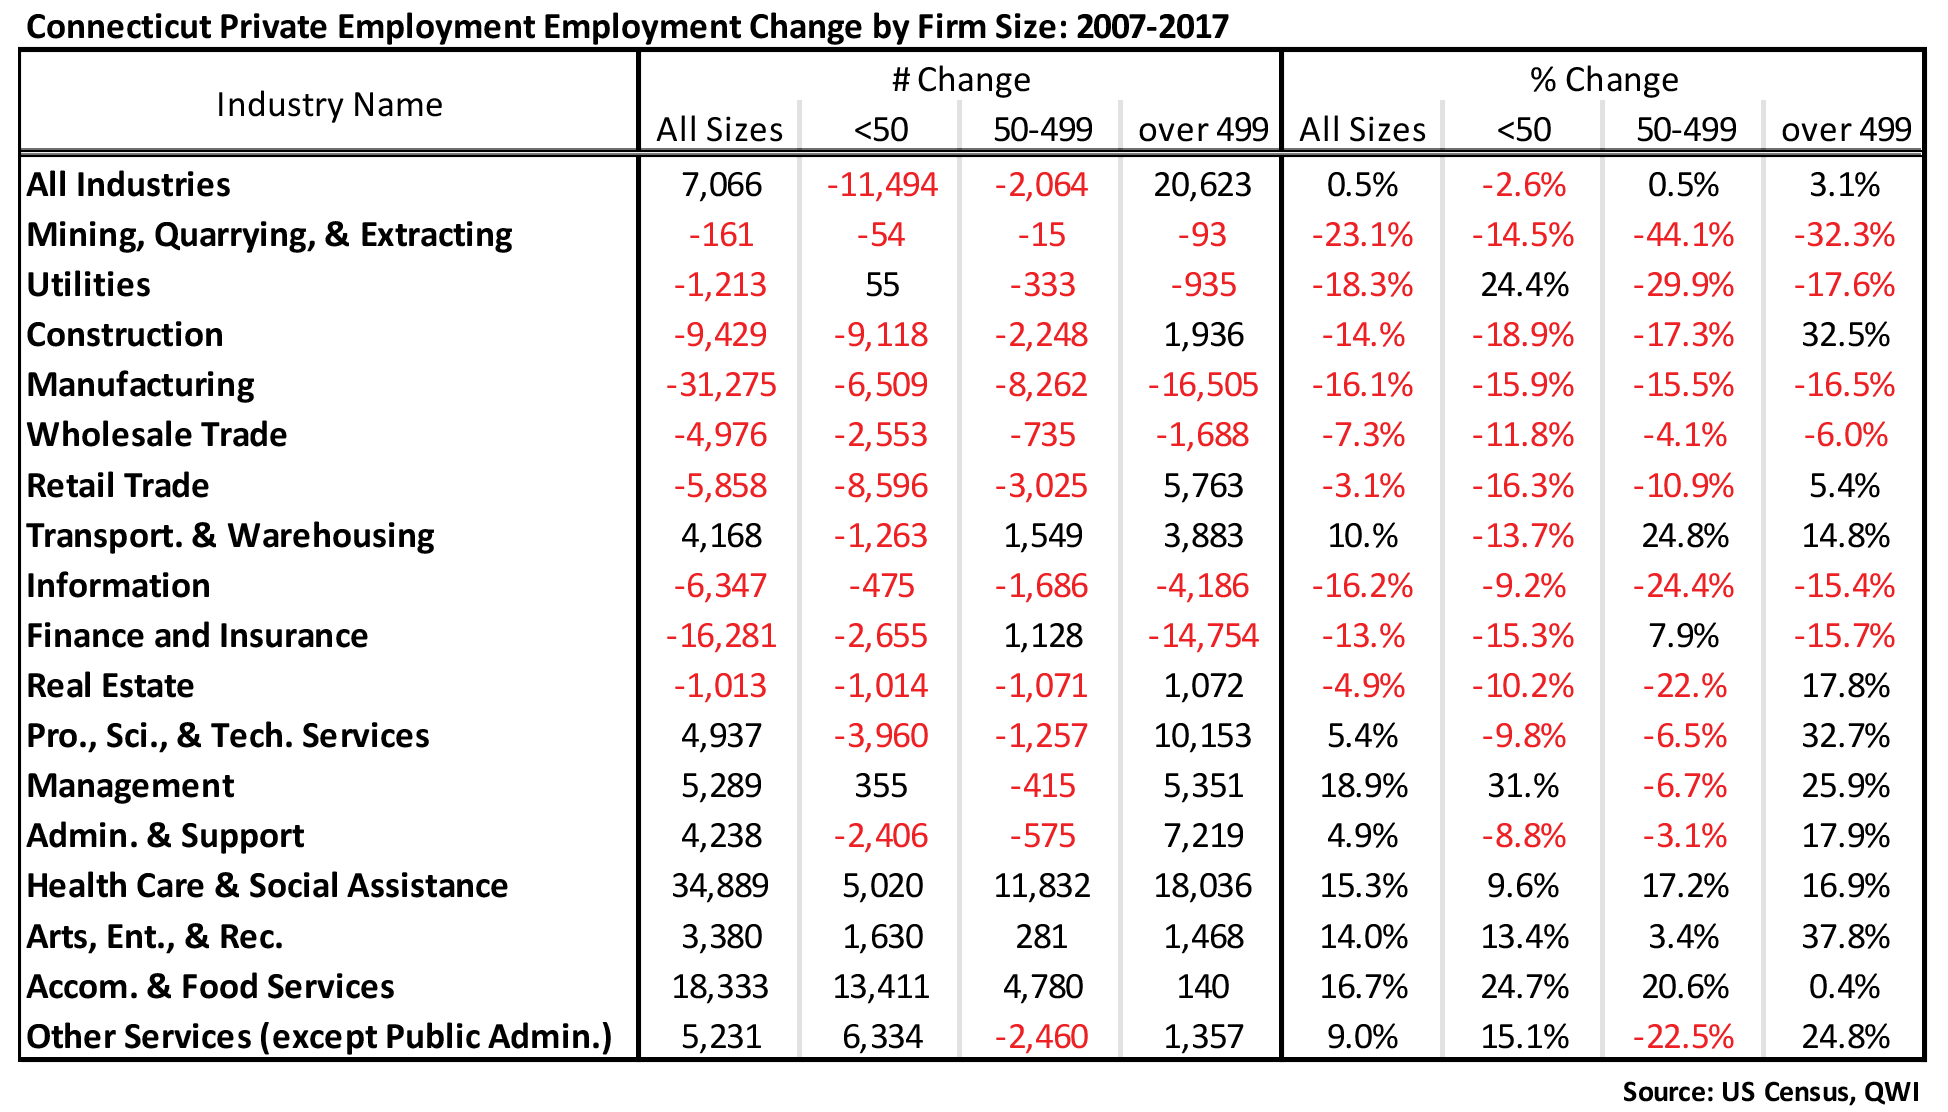 Connecticut Private Employment Employment Change by Firm Size: 2007-2017